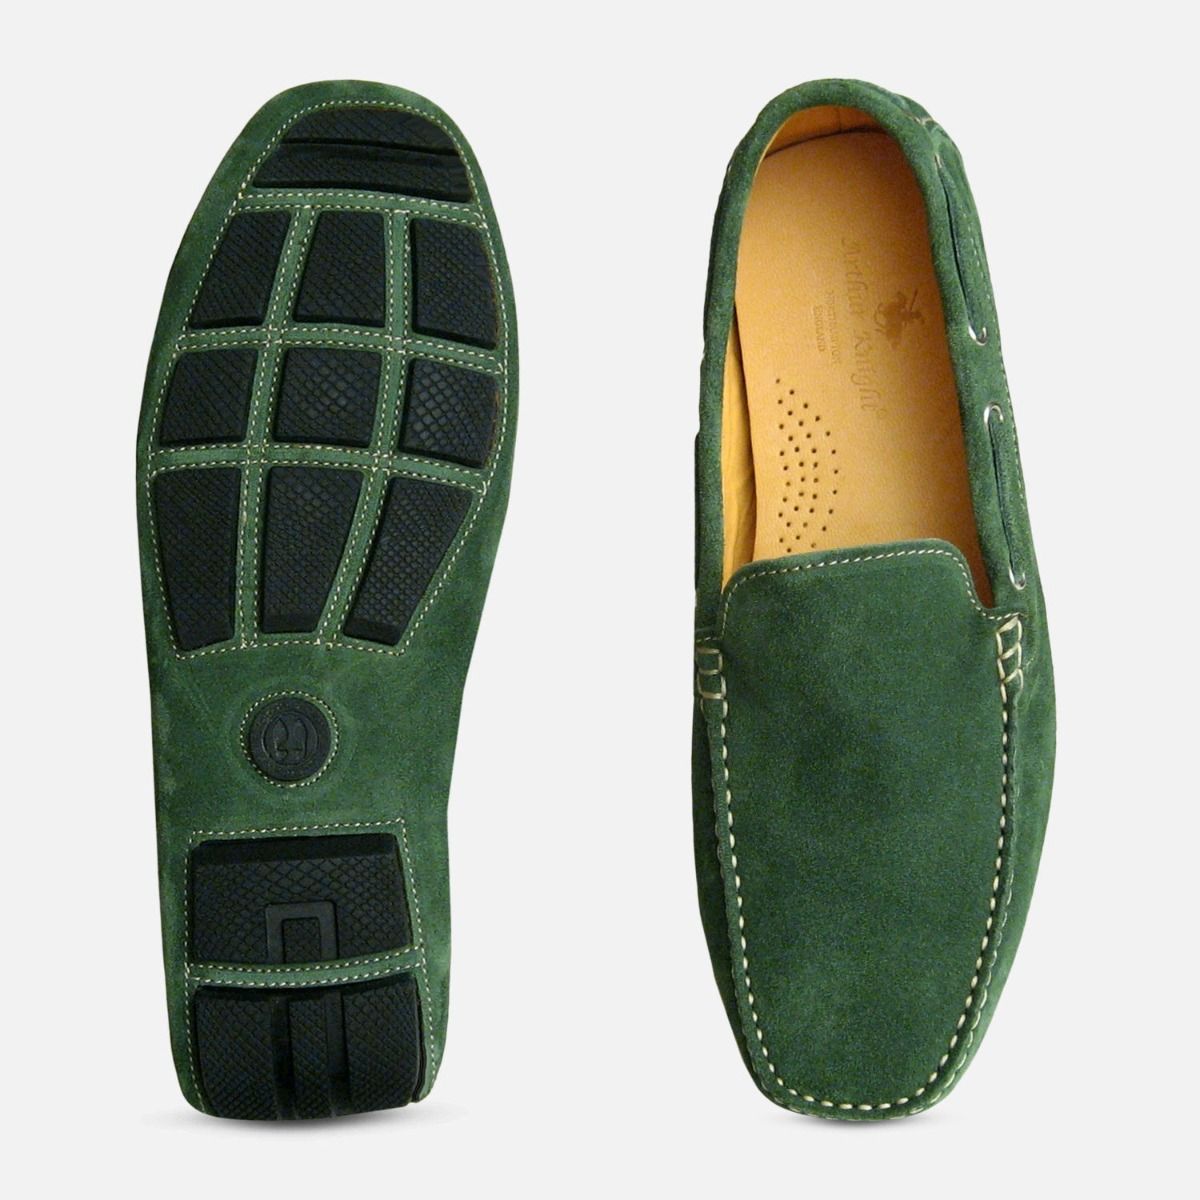 Green Suede Designer Driving Shoes